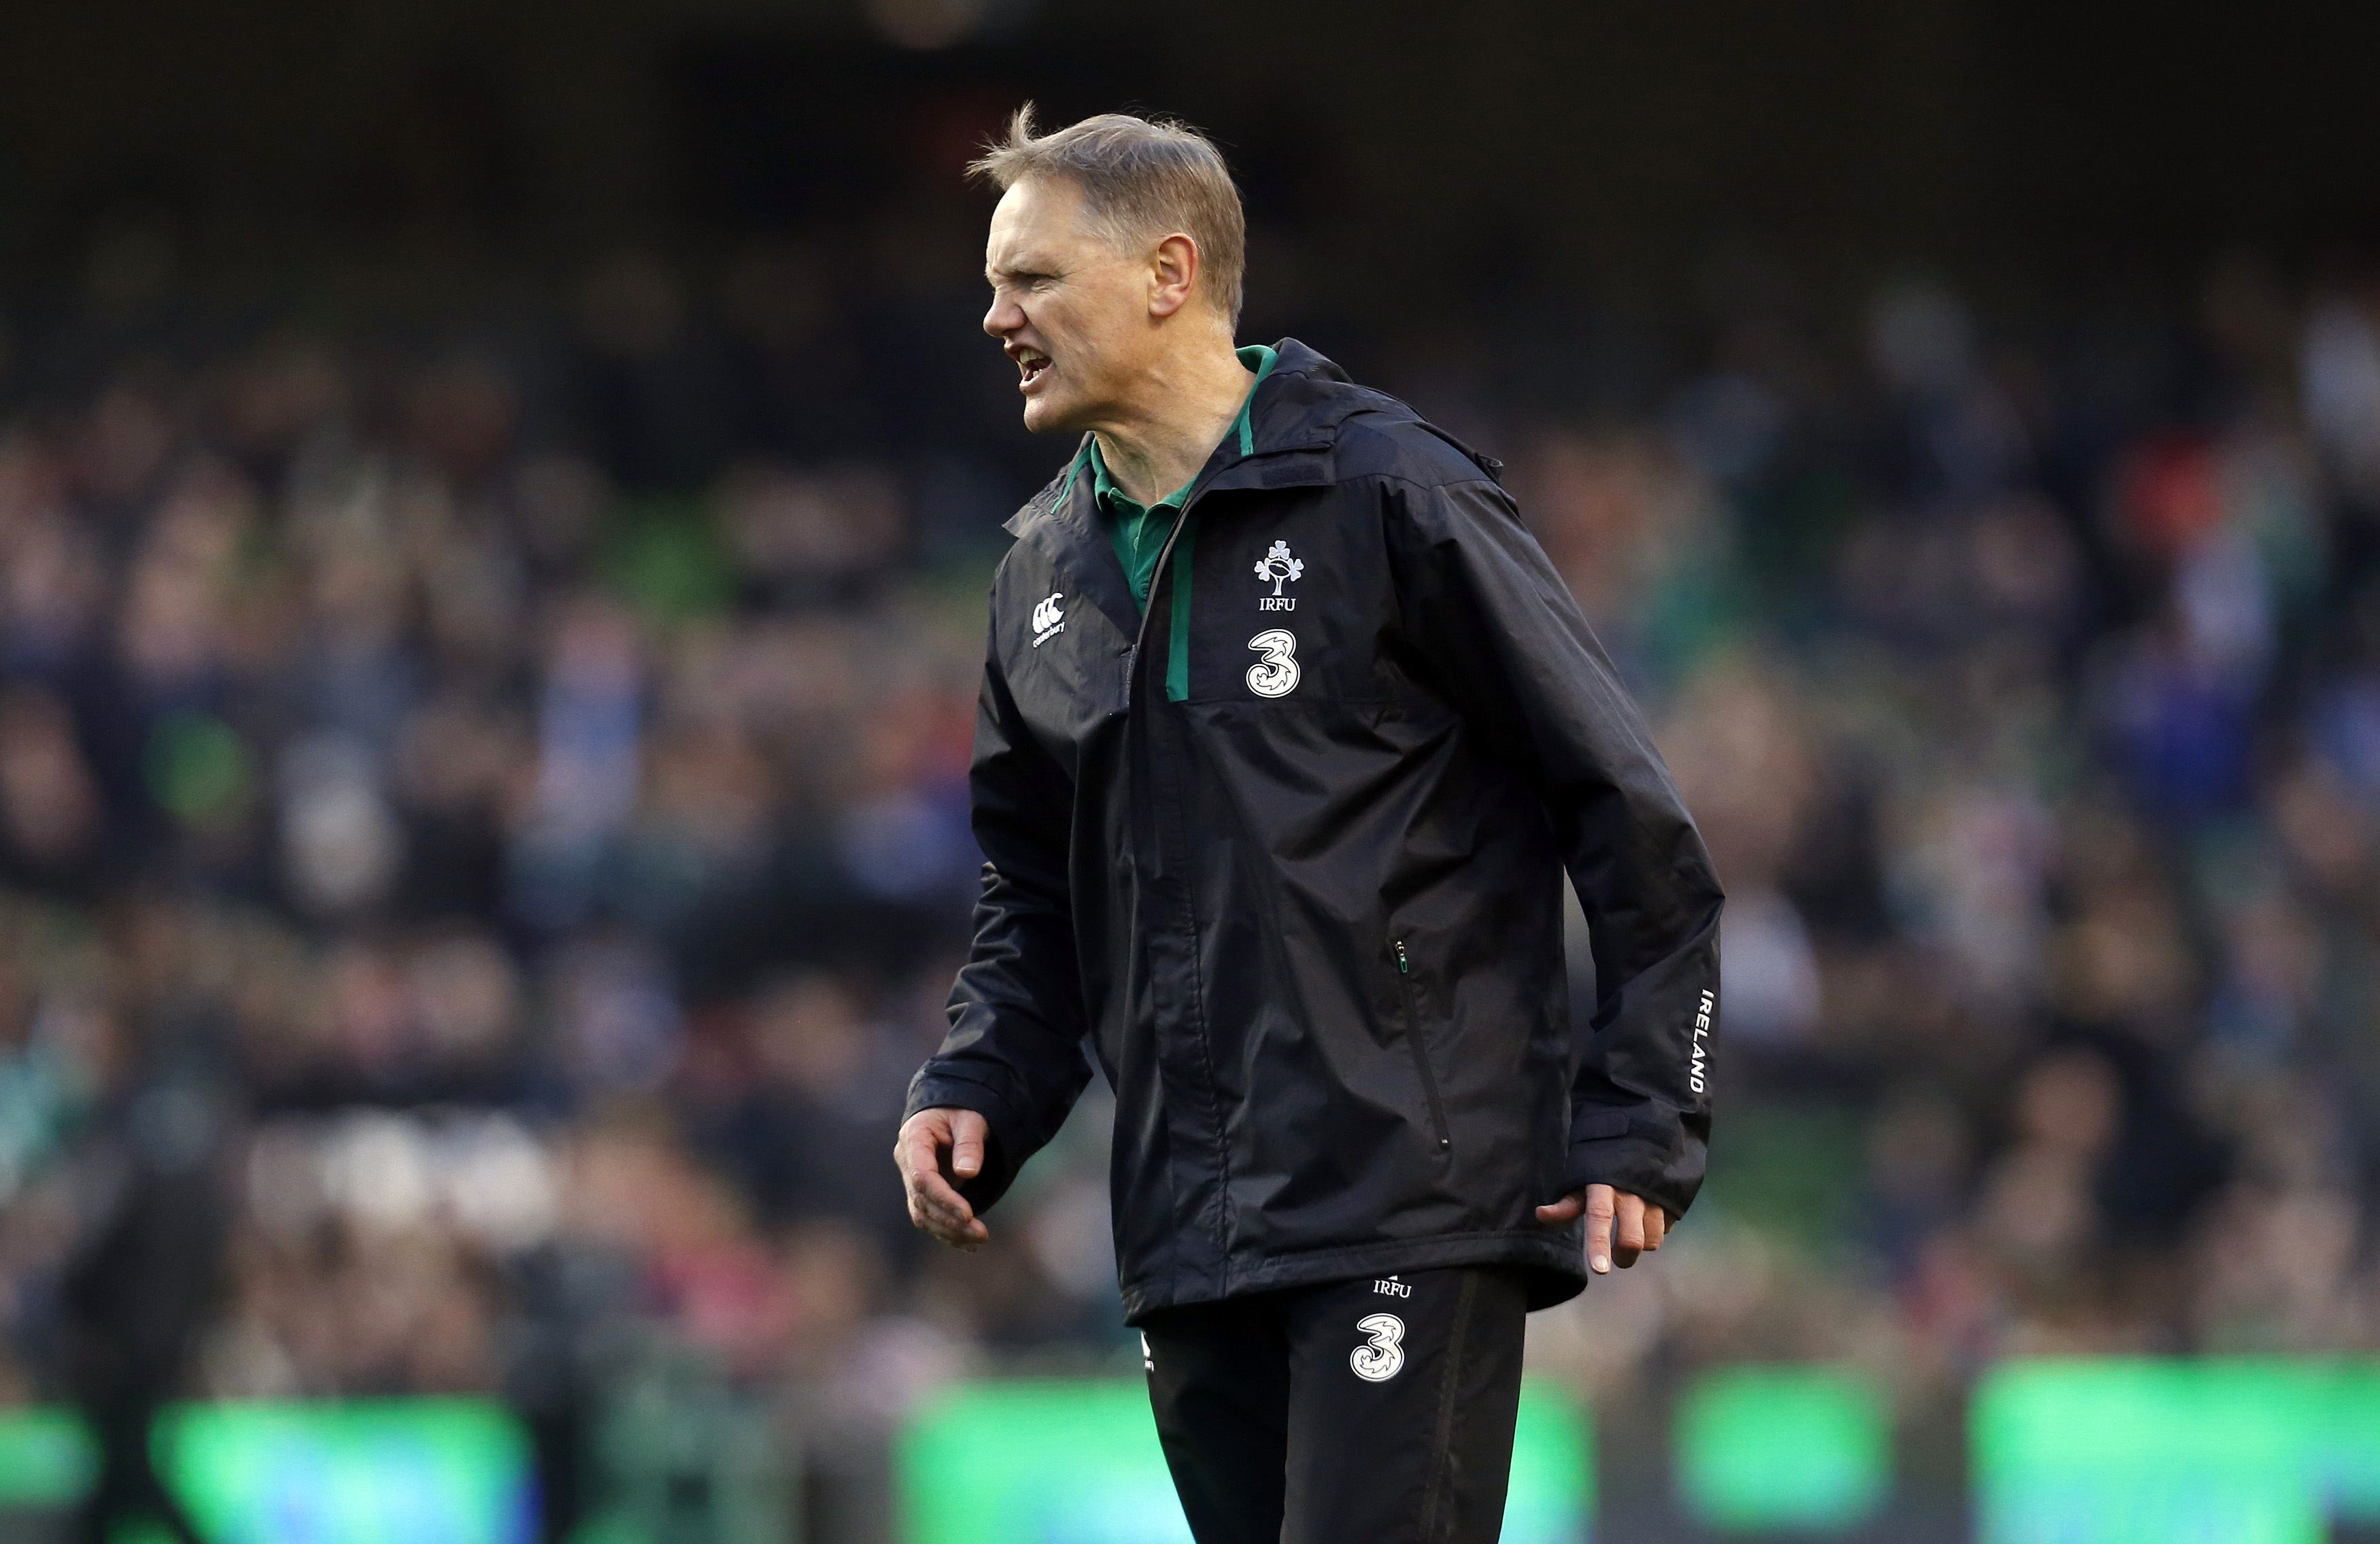 Under New Zealander Joe Schmidt, Ireland have chalked up 10 wins in a row, including against England, South Africa, Australia and two tests in Argentina. Photos: Reuters 